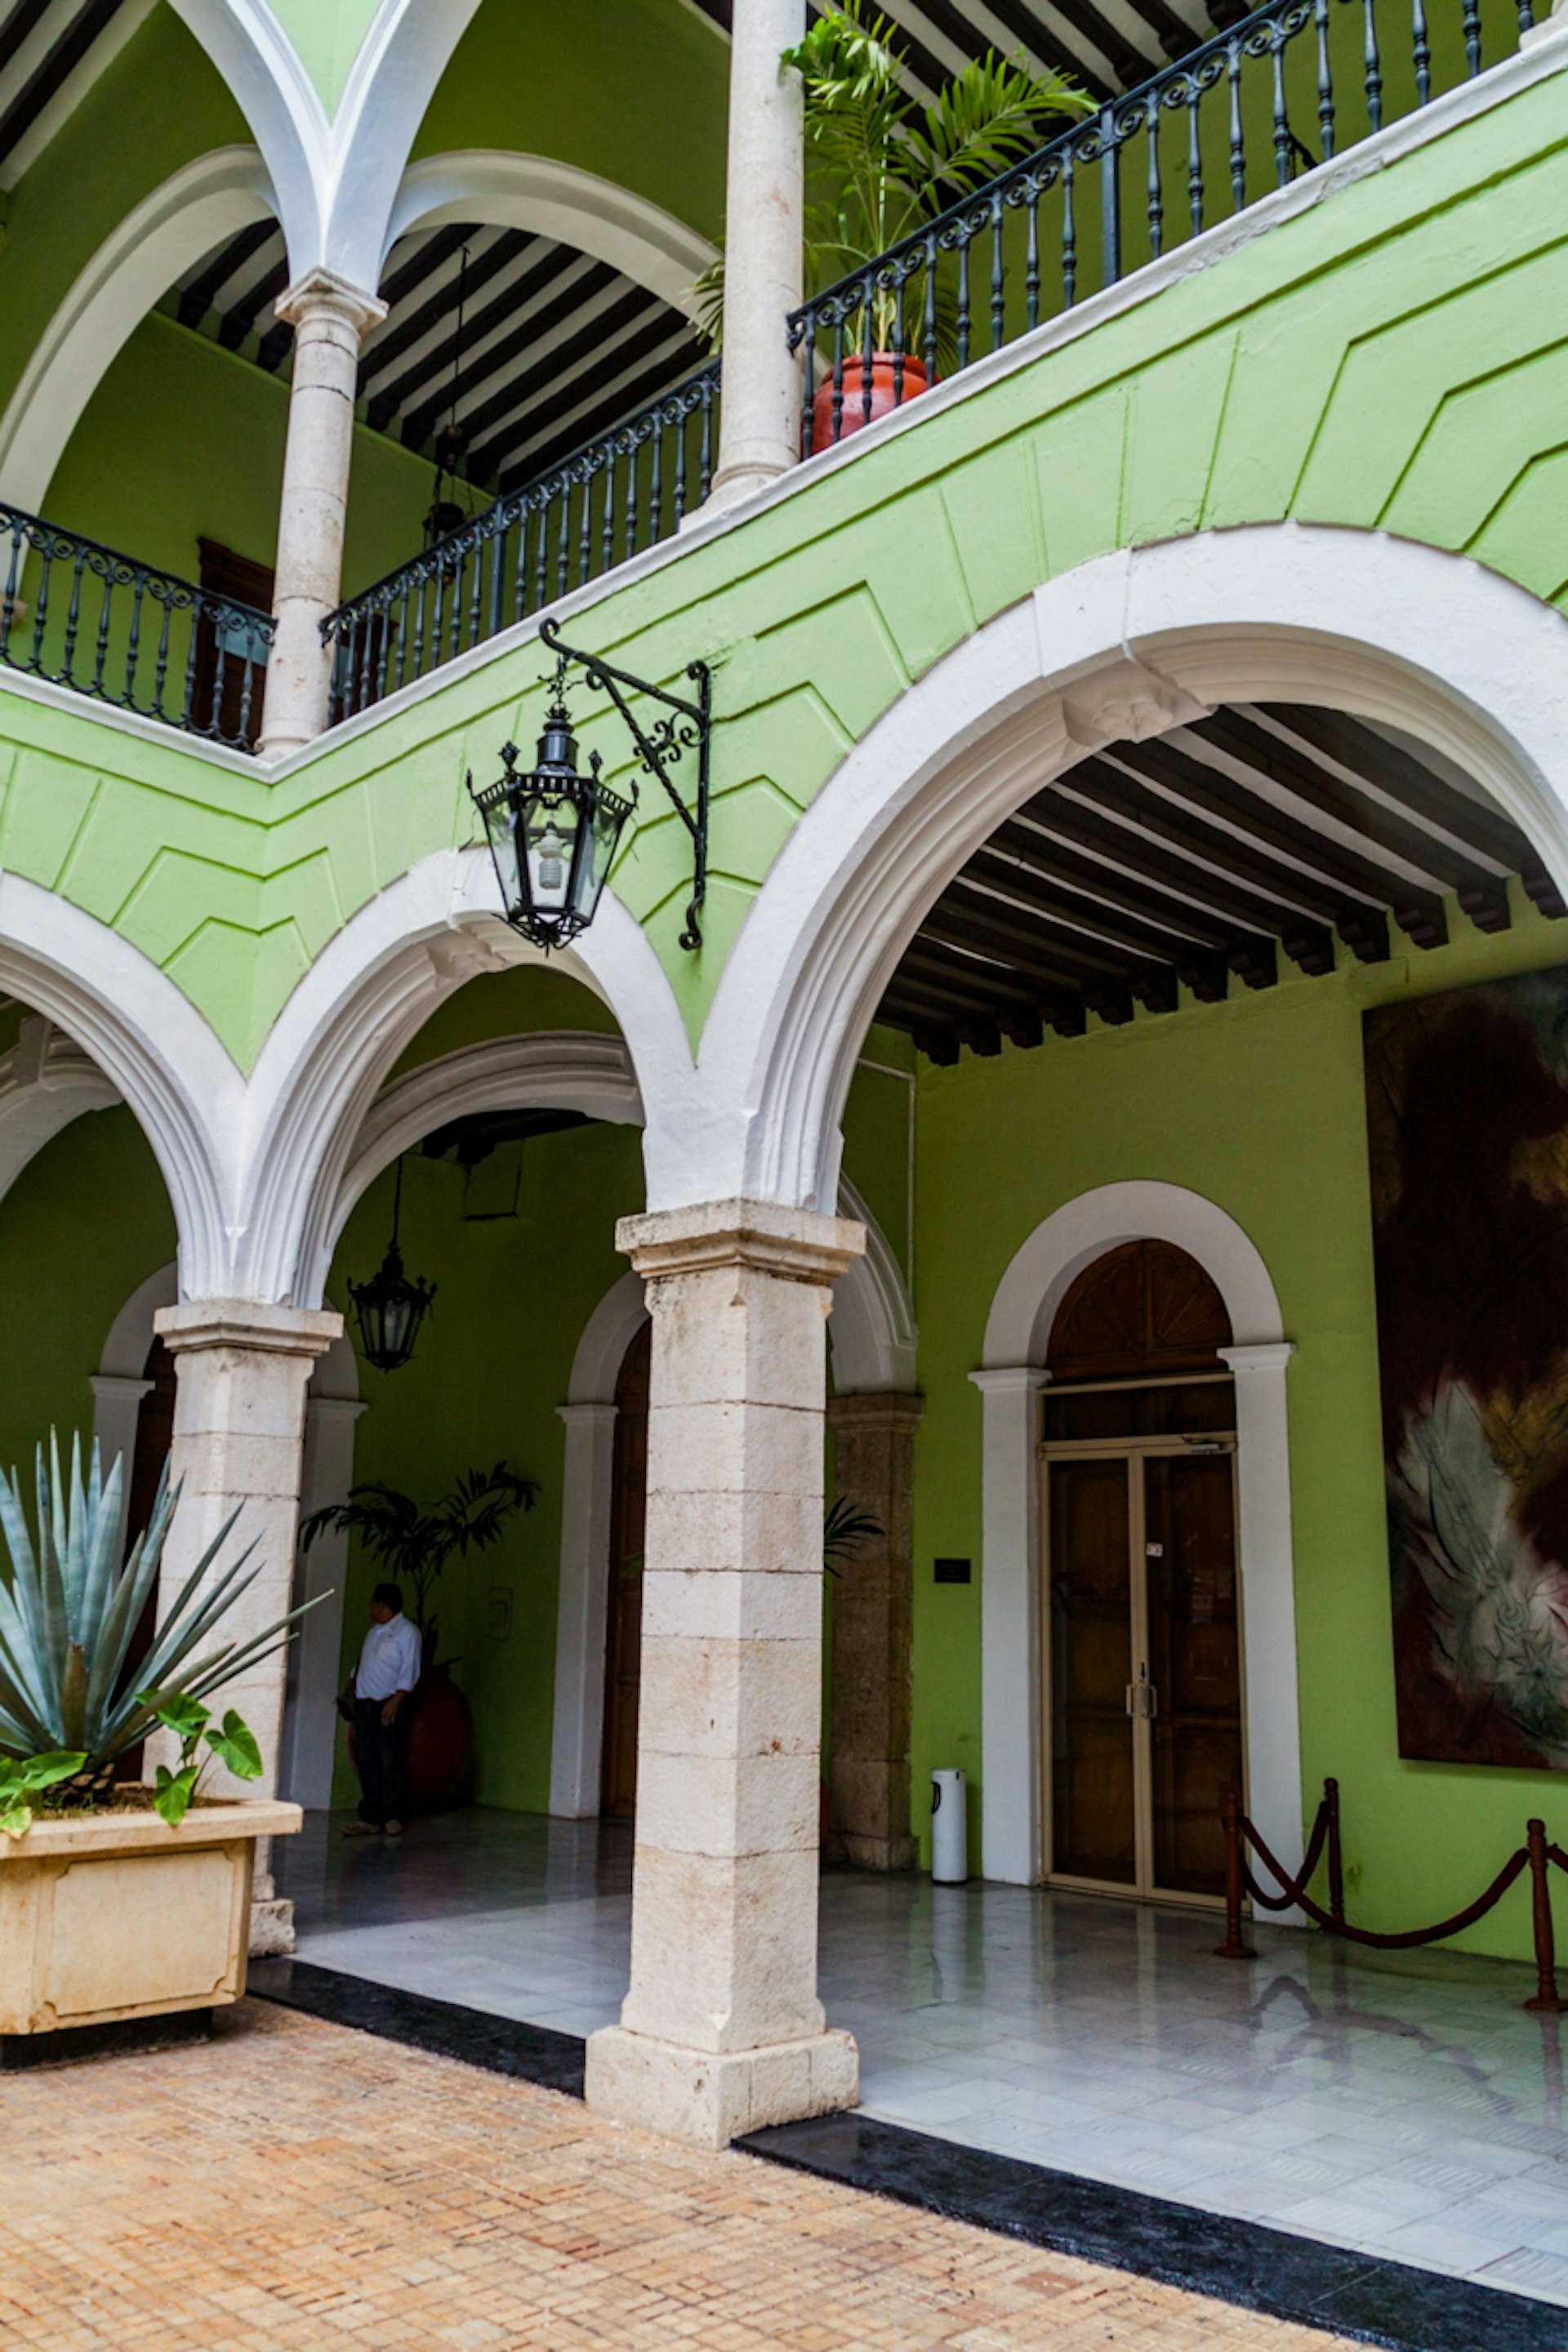 The Palacio de Gobierno is another beautiful example of Mérida's rich architectural heritage © Matyas Rehak/Shutterstock